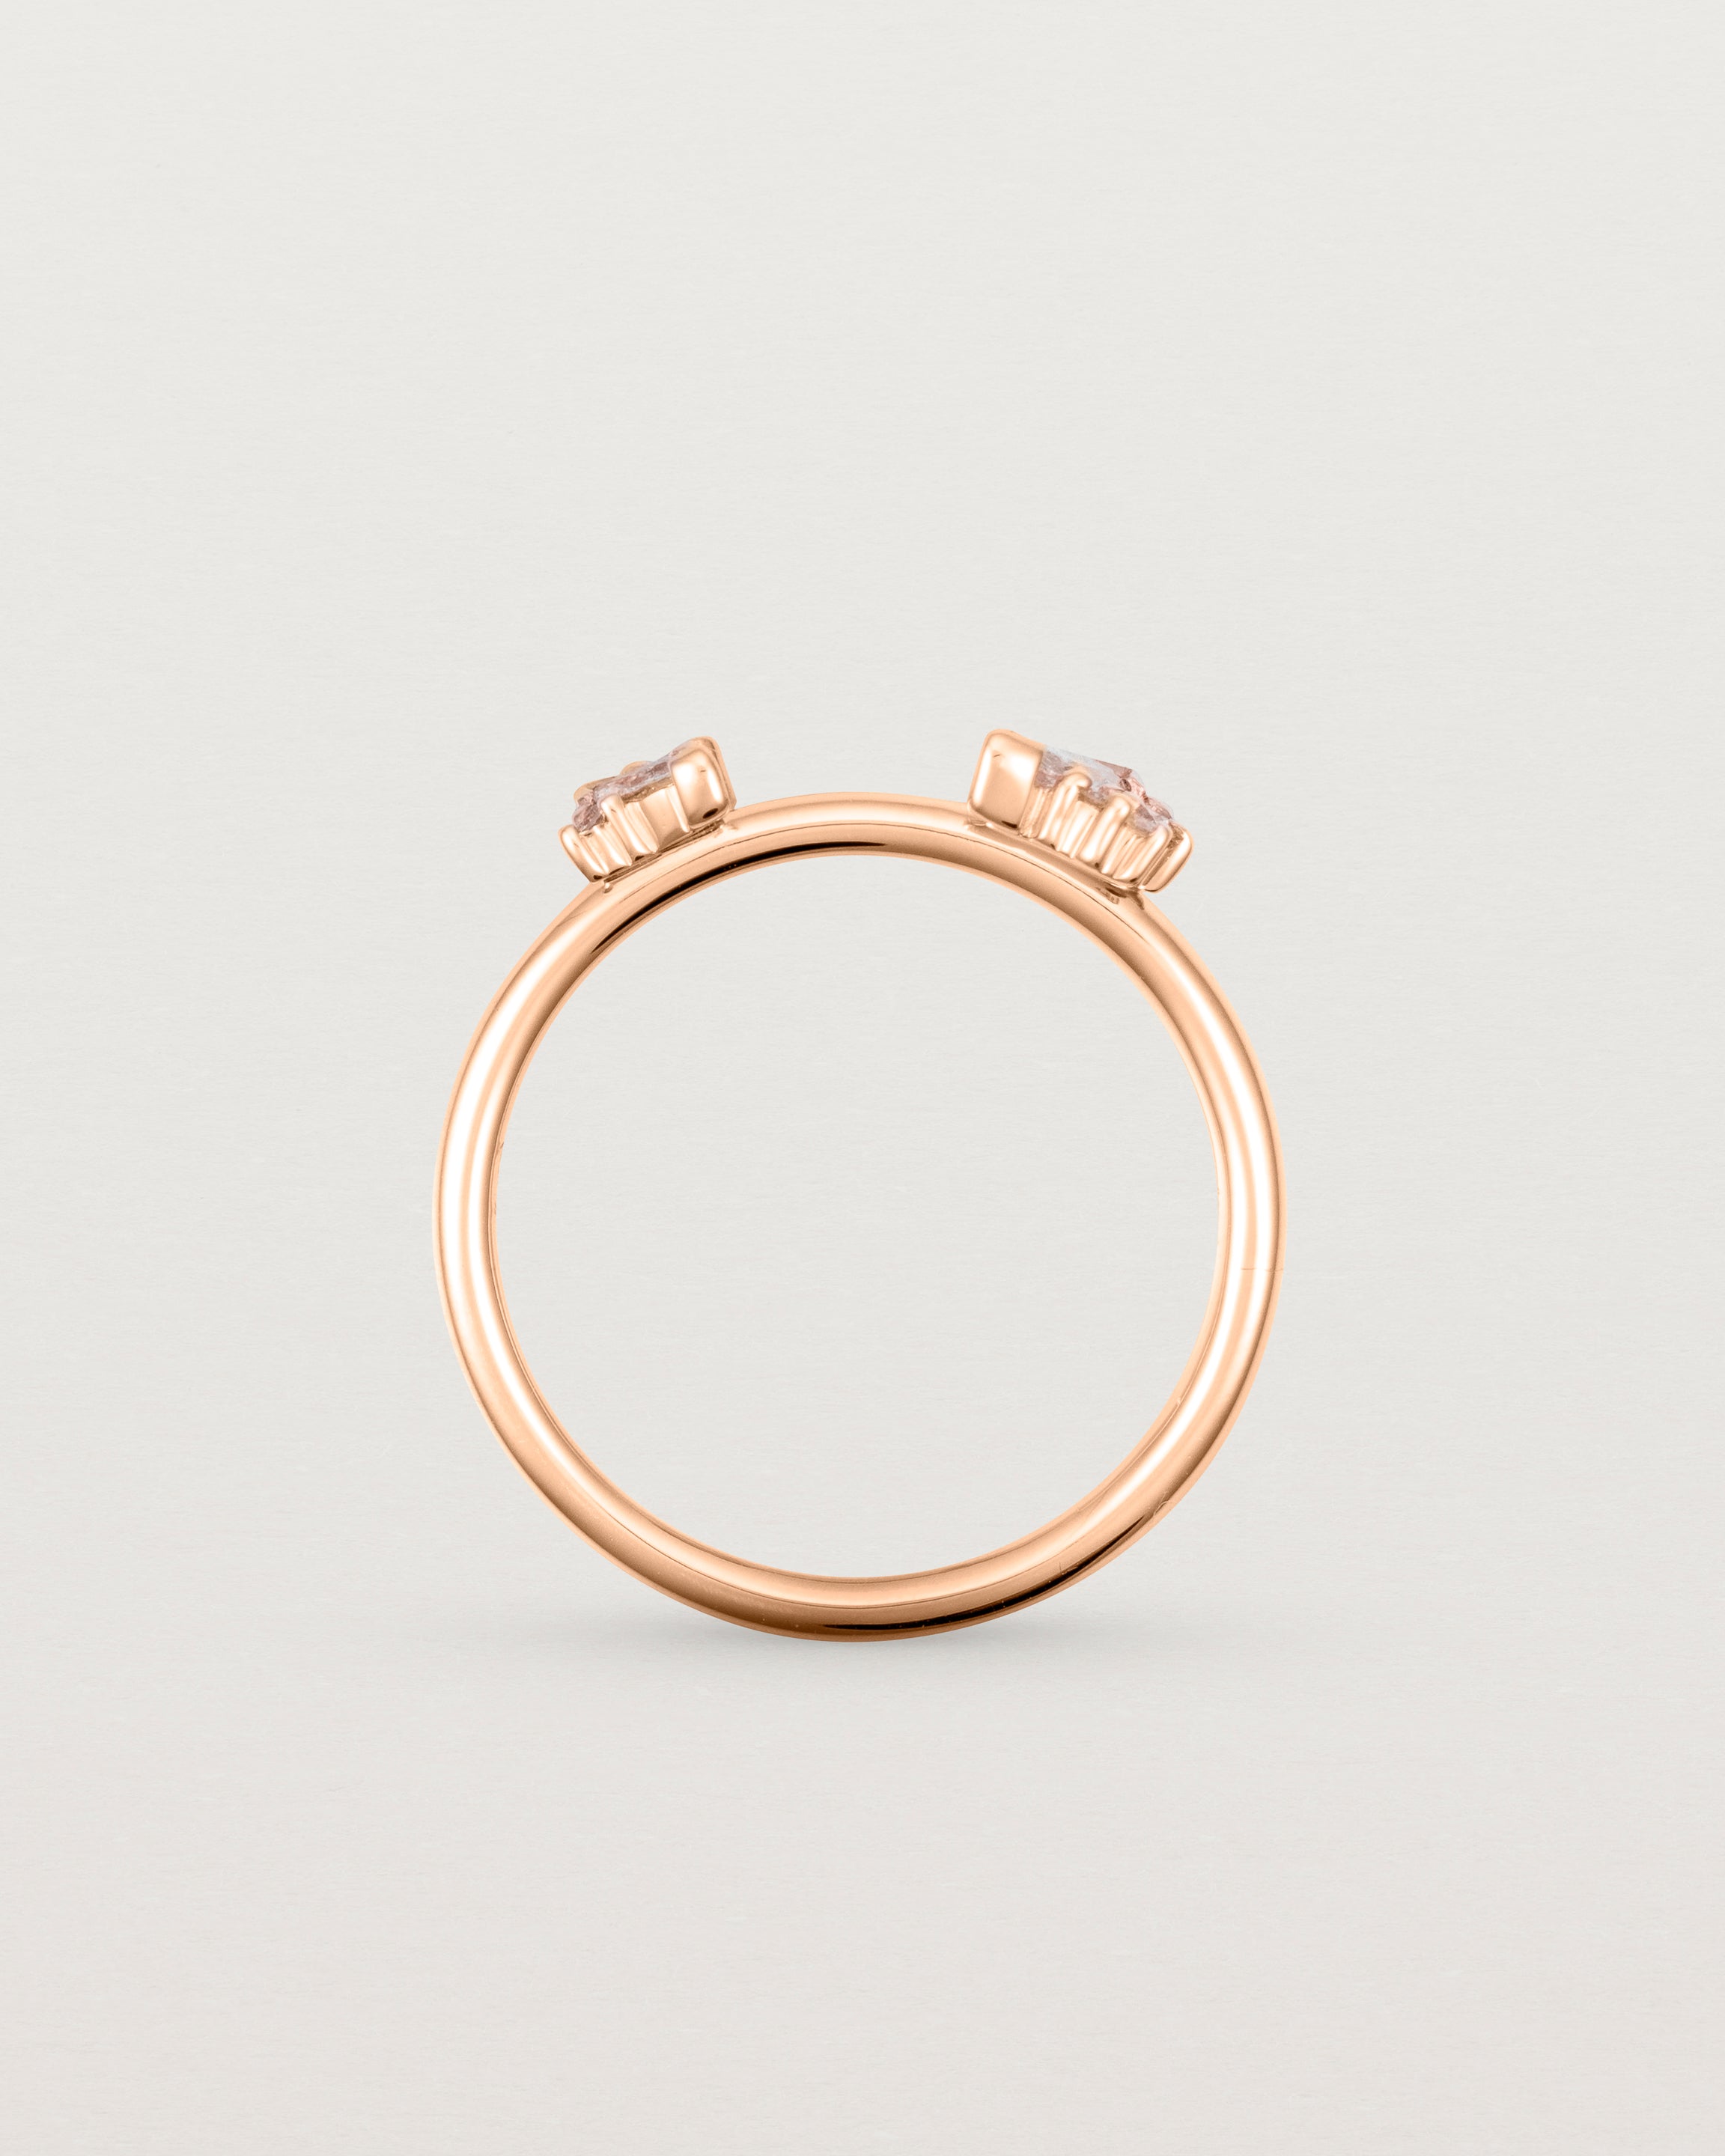 Standing view of the Freya Cluster Ring | Diamonds in Rose Gold.